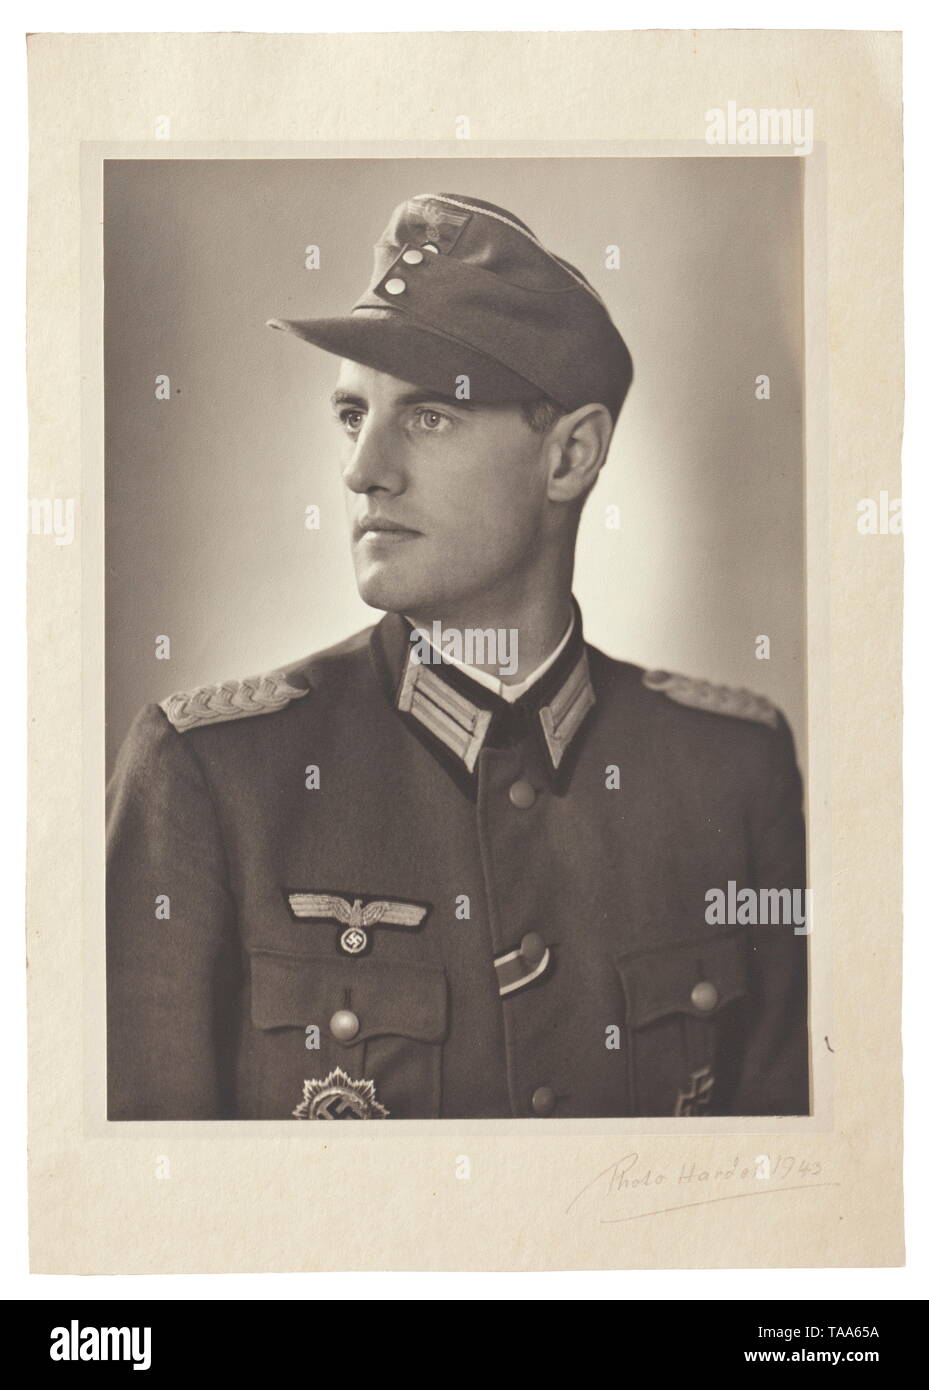 Documents and photos of Oberstleutnant Werner Hauschildt, commander of Panzer Grenadier Regiment "4" in 6th Panzer Division Documents: Commendation Certificate for Outstanding Services on the Battlefield of "Olesha" dated 27 May 1944 with original signature of Adolf Hitler, dimensions 21 x 29.5 cm. Recommendation for the Knight's Cross of the Iron Cross dated 6 May 1945 with original signature of General Freiherr von Waldenfeld. Preliminary possession document for the German Cross in Gold dated 30 April 1943, along with various best wishes letters and telegrams. Award docum, Editorial-Use-Only Stock Photo